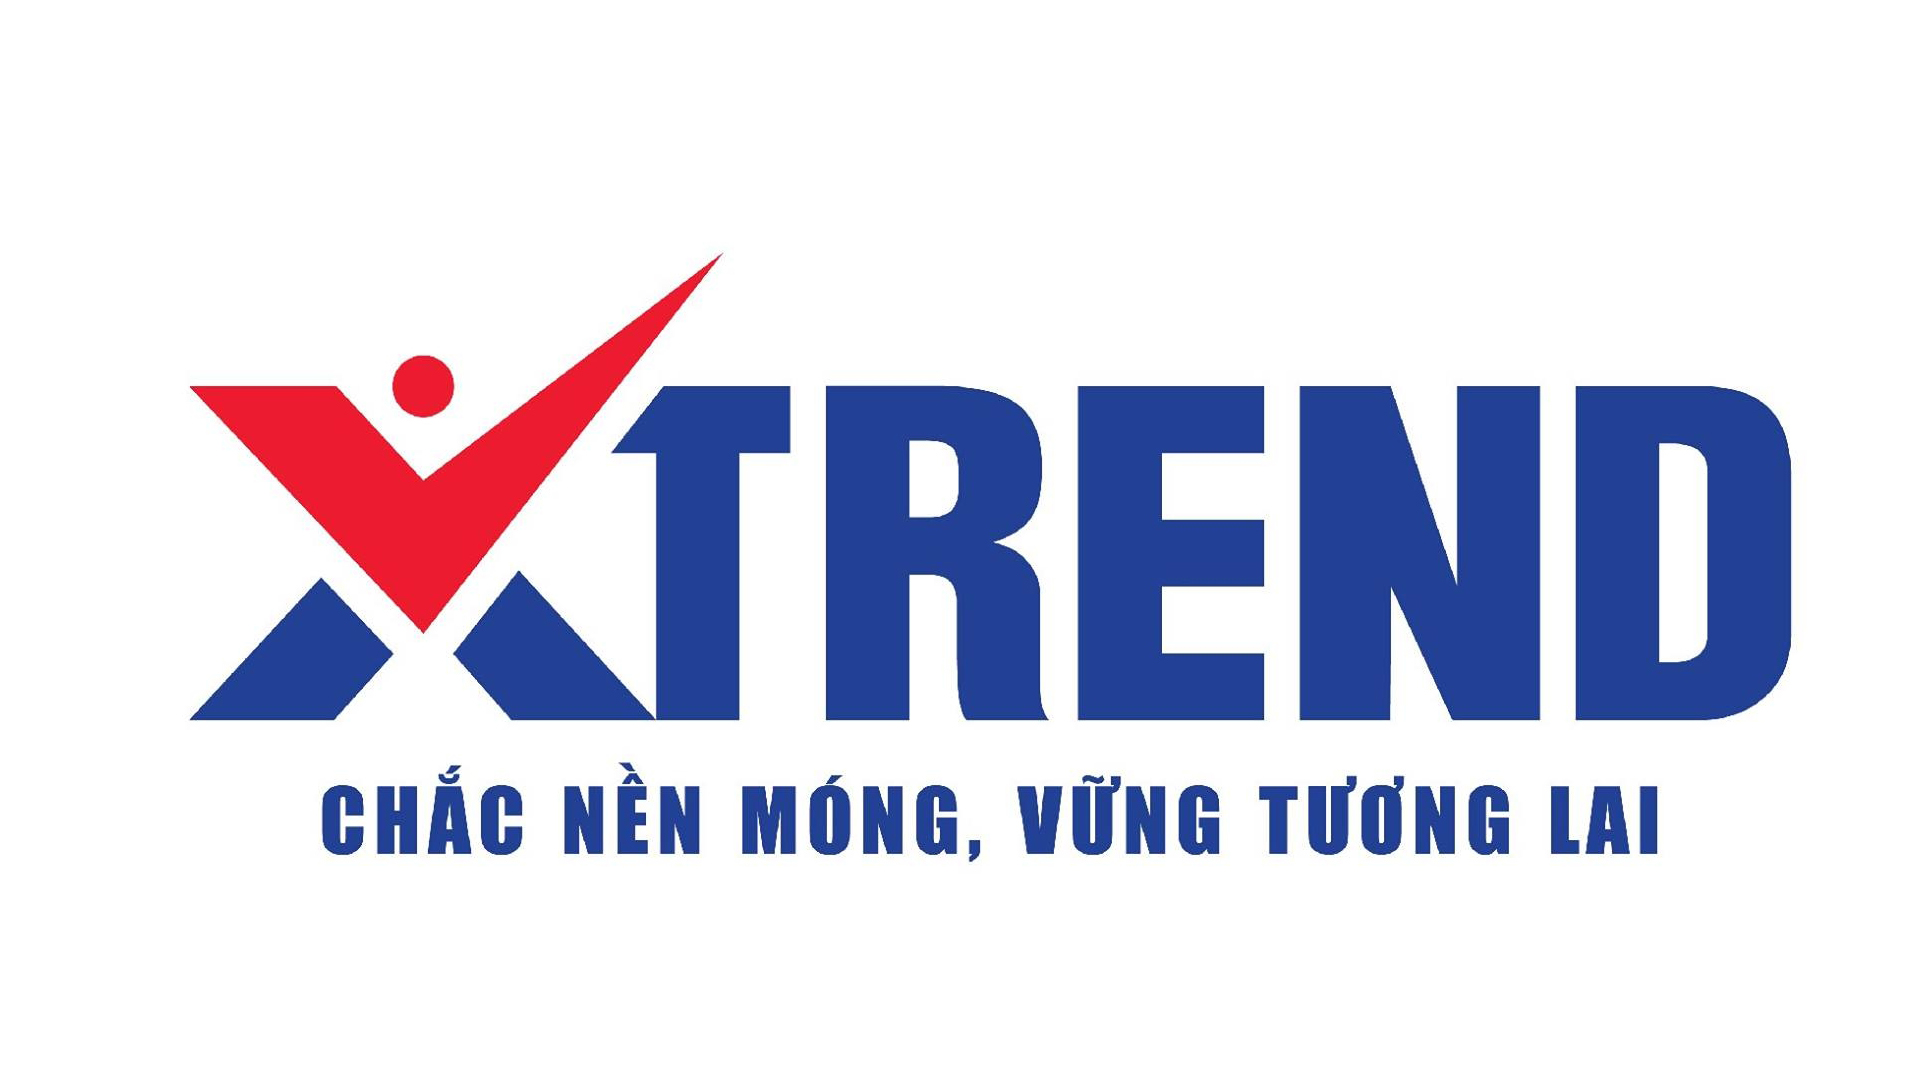 Xtrend